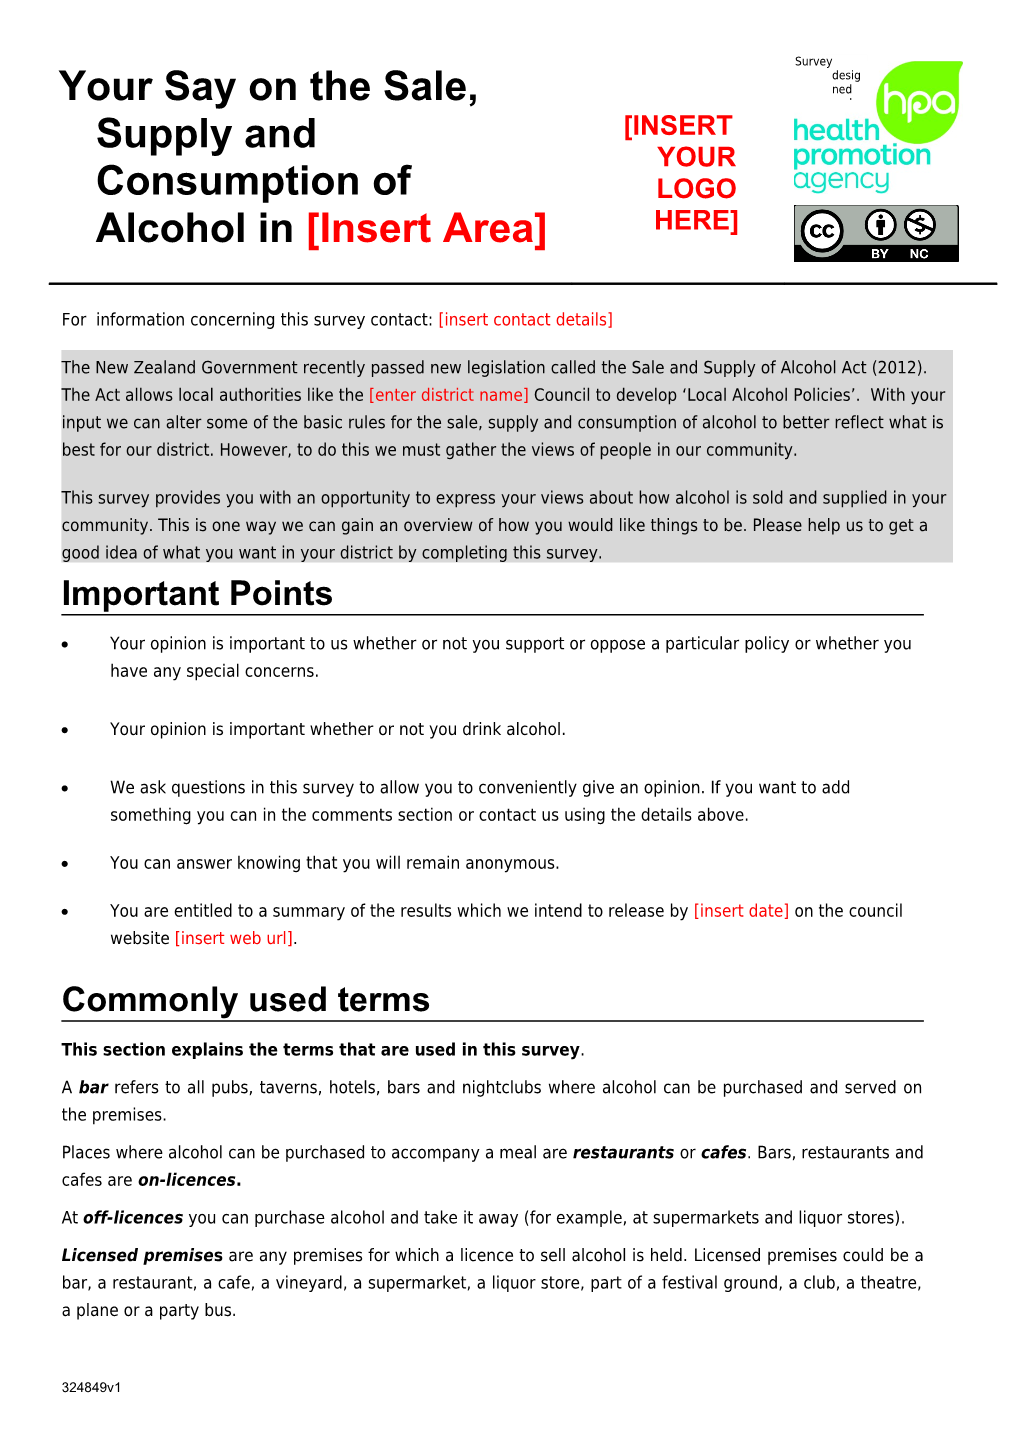 Your Say on the Sale, Supply and Consumption of Alcohol in Insert Area